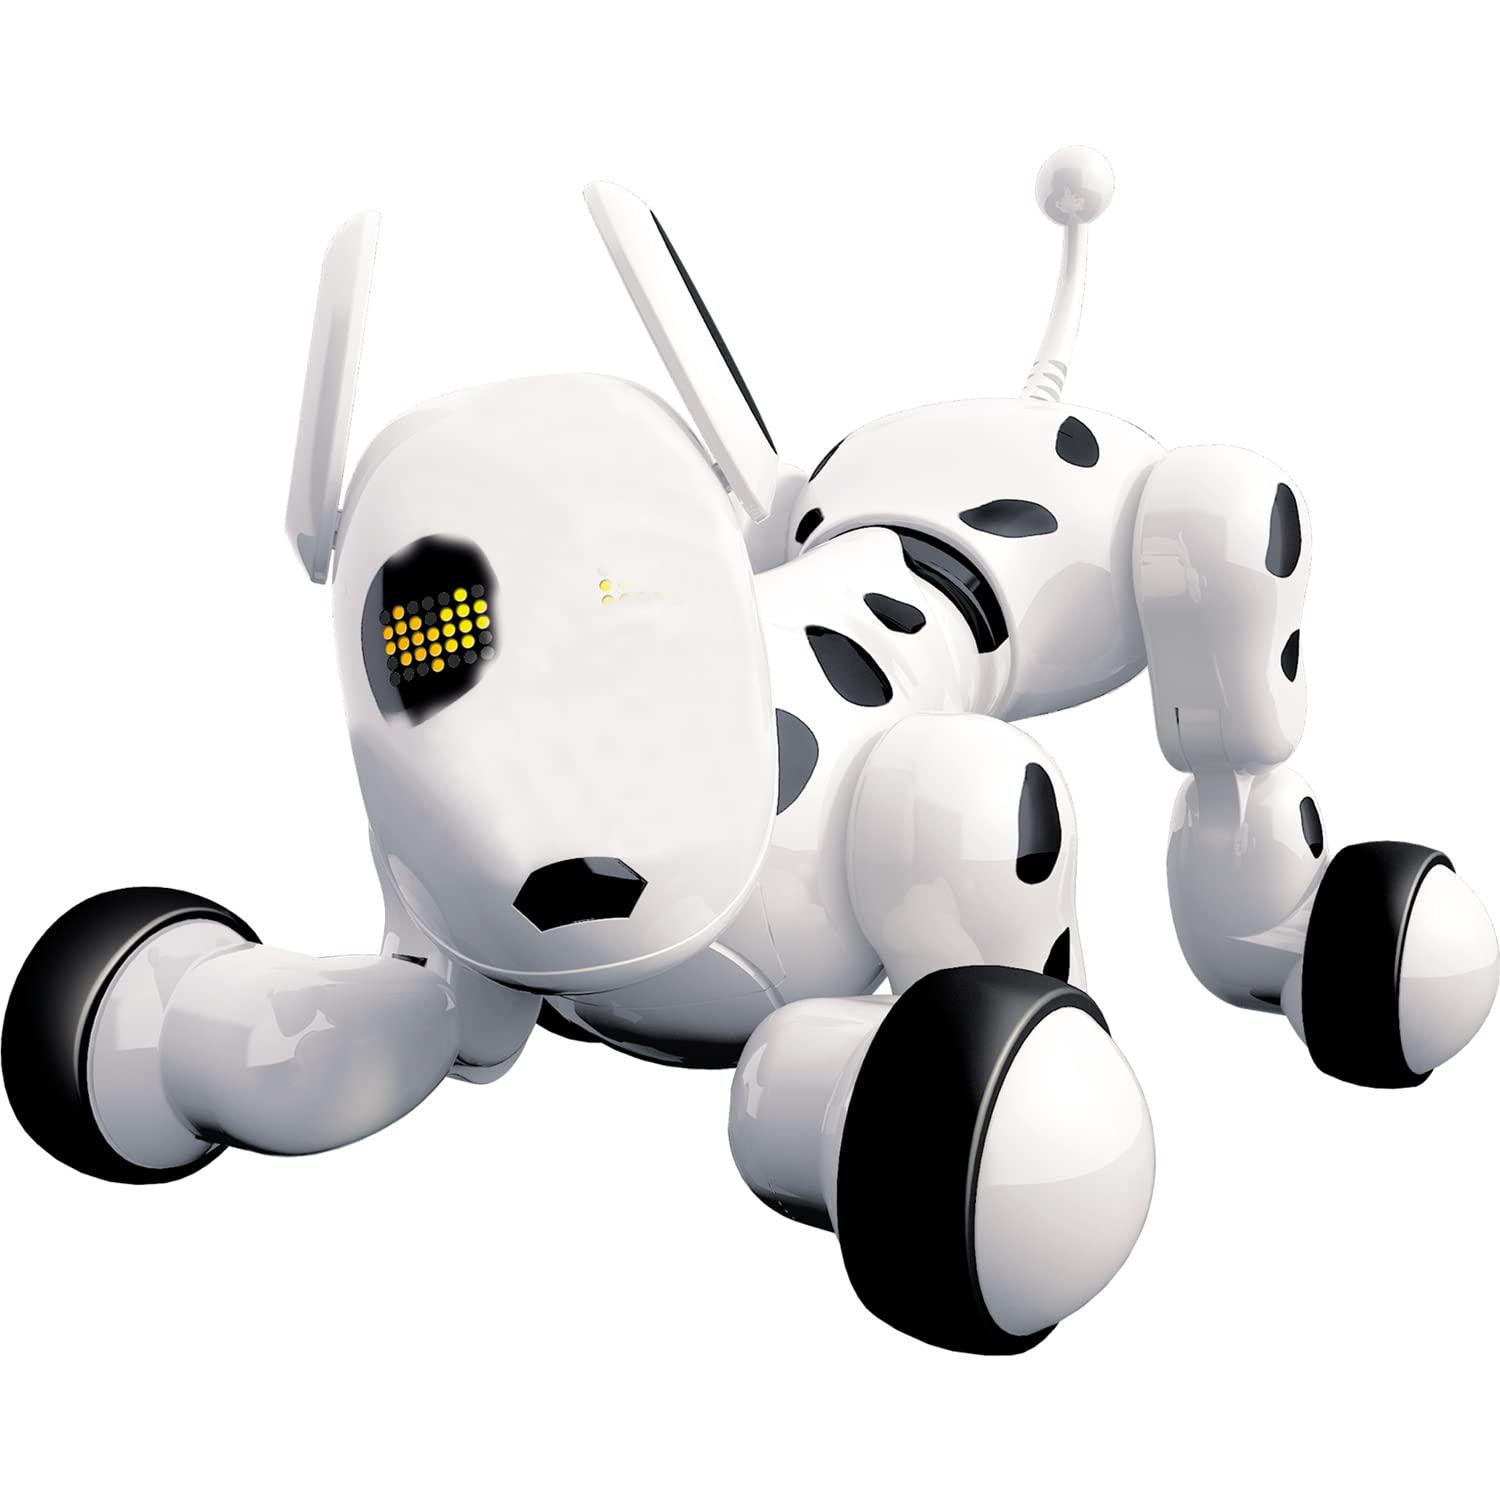 dimple dc13991 interactive robot puppy with wireless remote control kids robotic toy electronic pet rc animal dog toy #1 for 